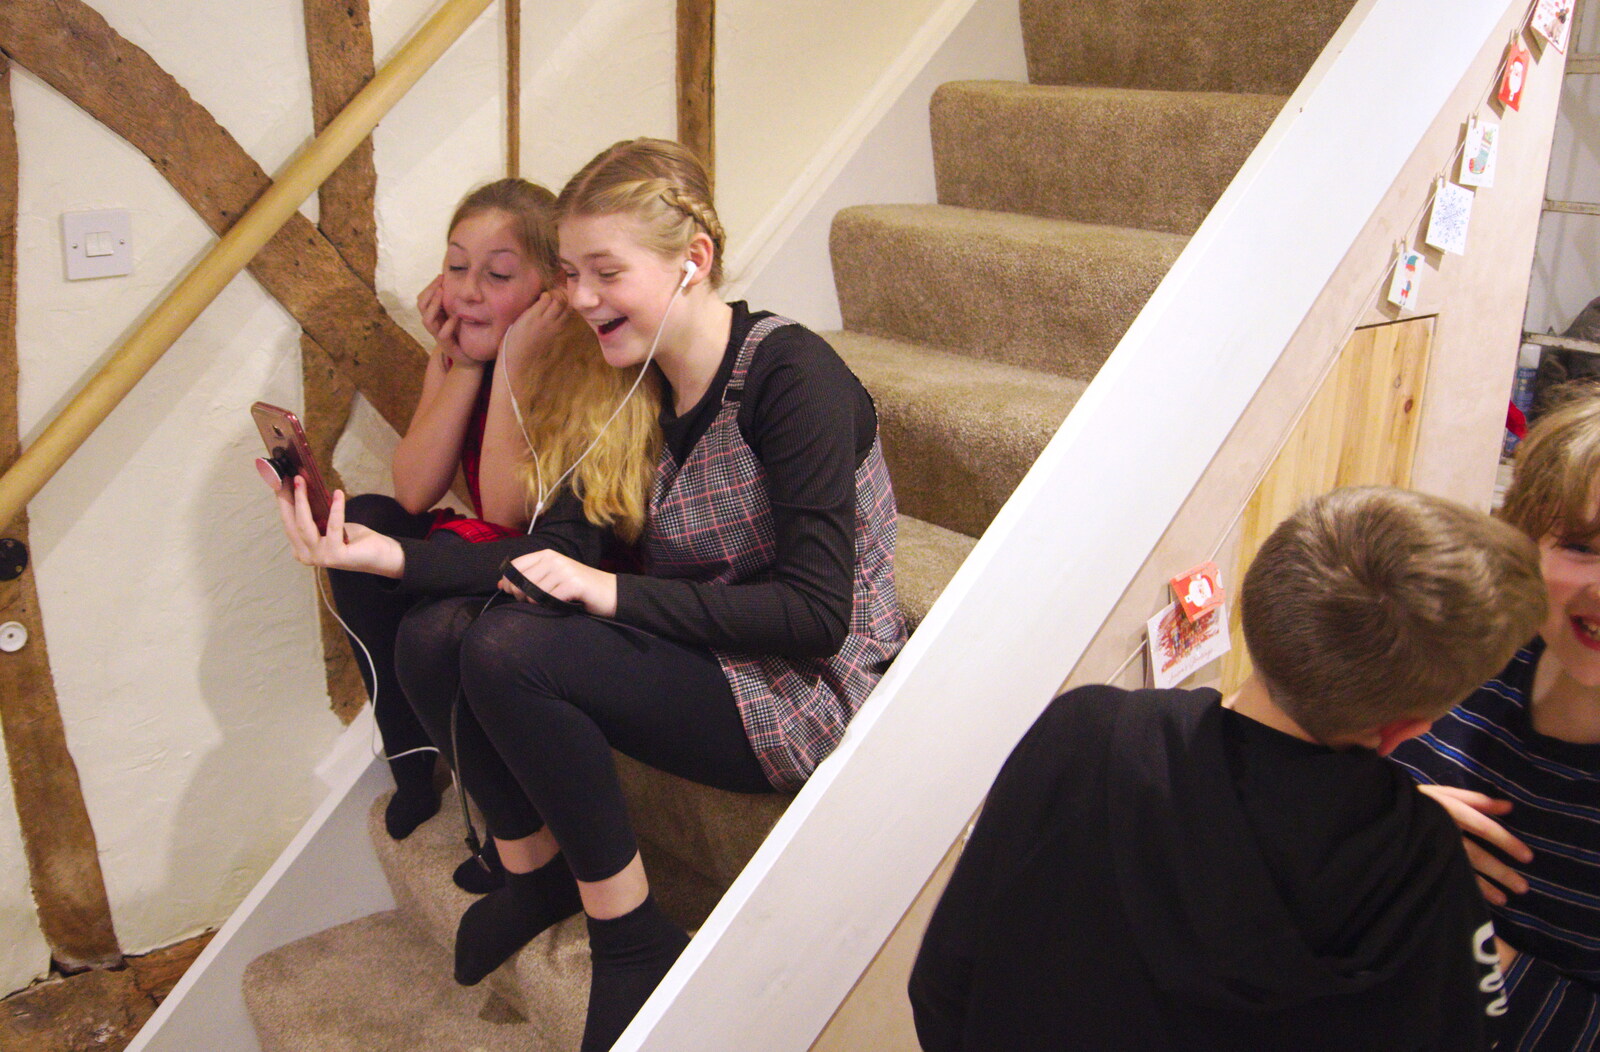 A Facetime conference occurs on the stairs from A New Year's Eve Party, Brome, Suffolk - 31st December 2019